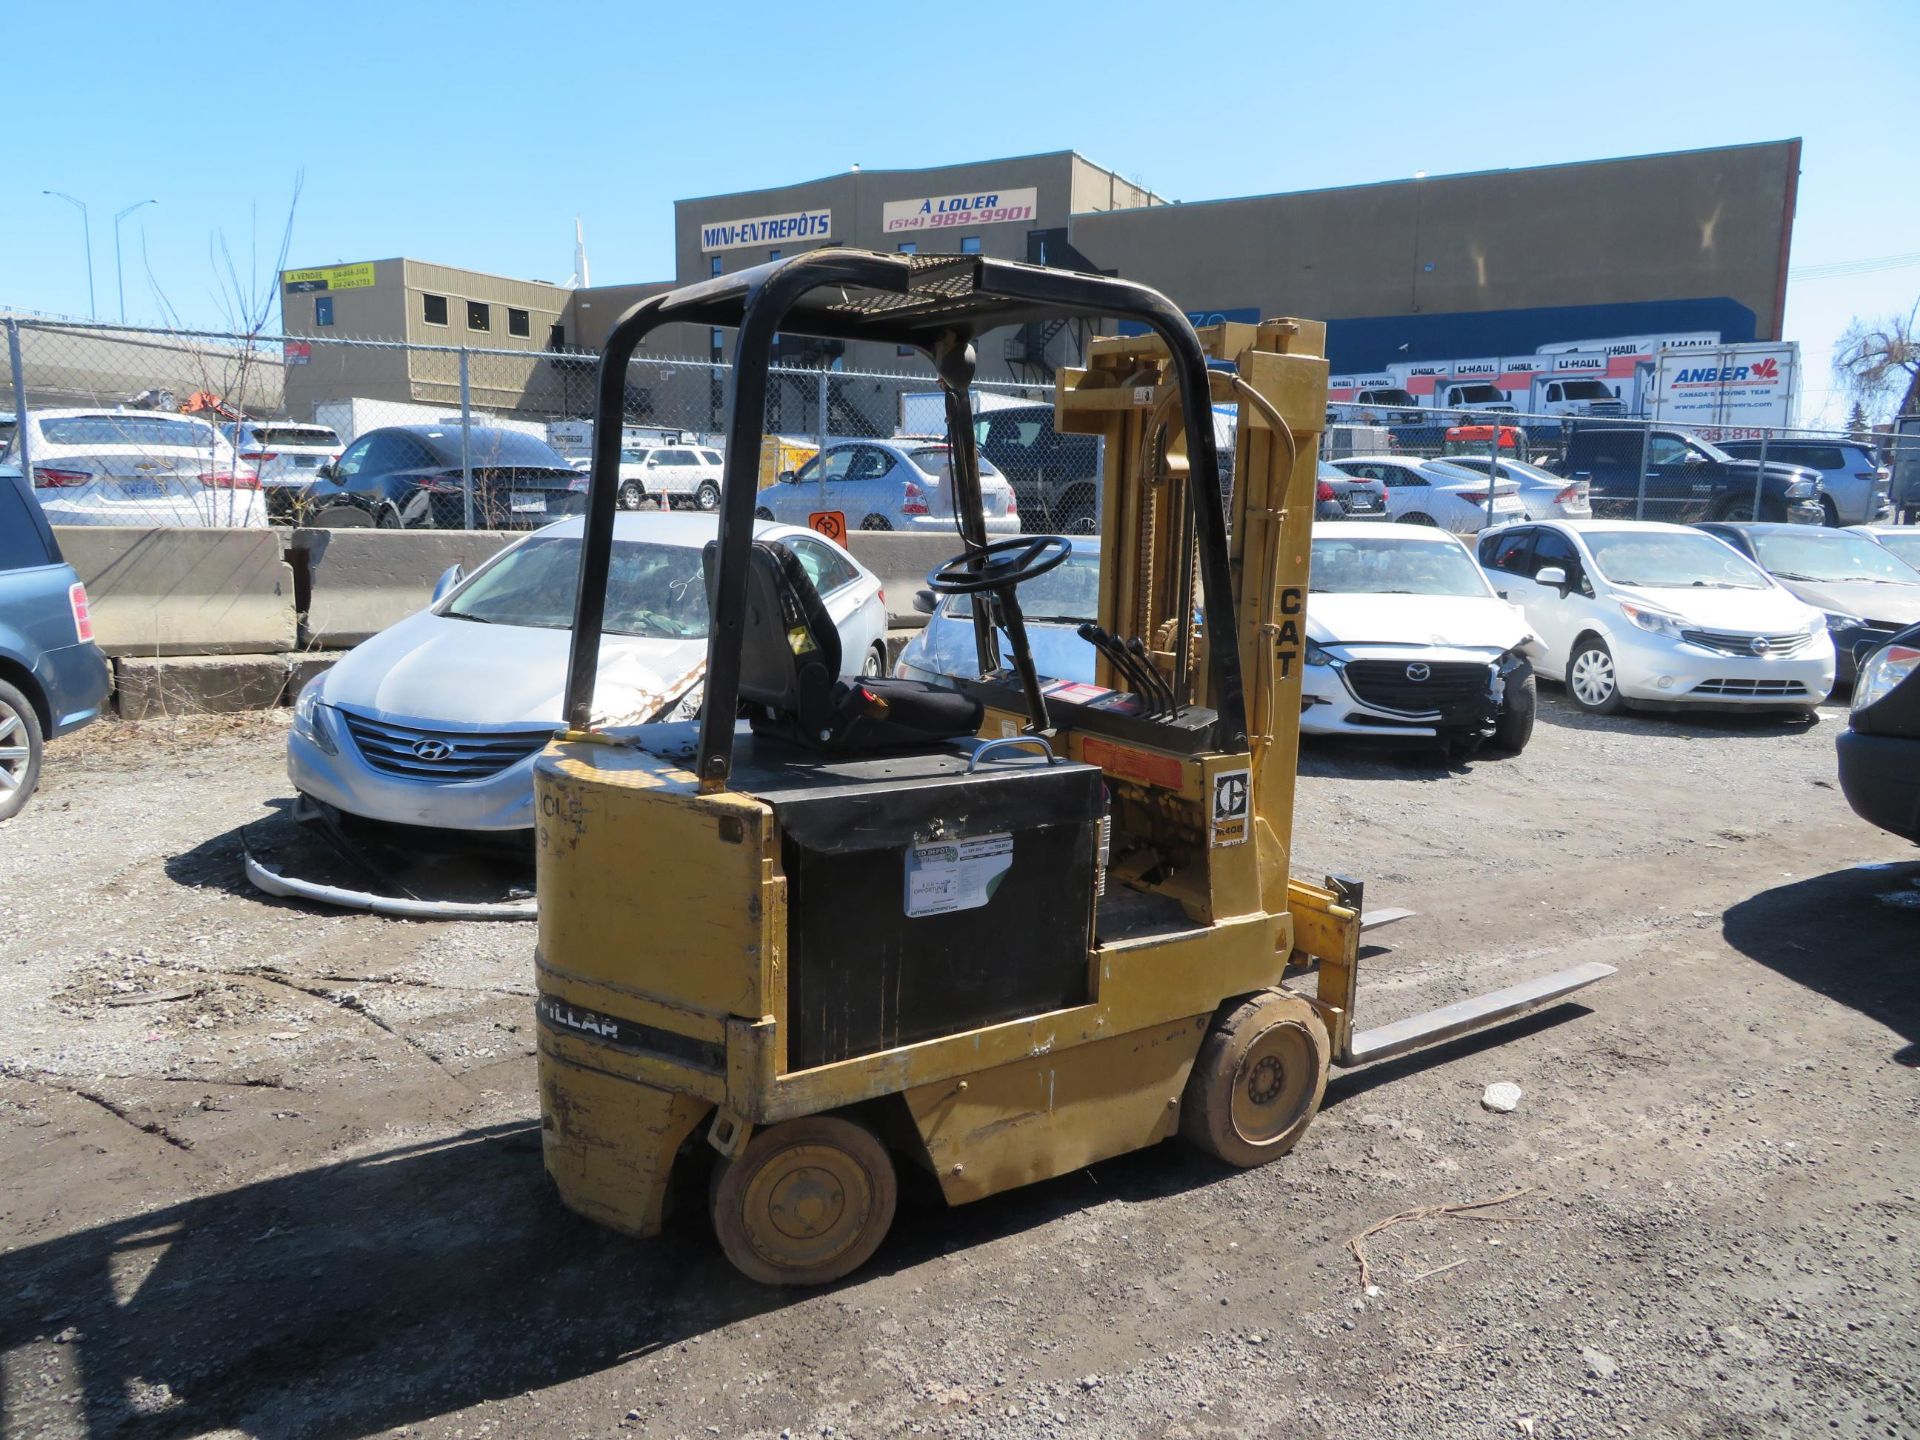 CATERPILLAR electric fork lift, Mod# M408, cap: 4,000 LBS, 3 sections, side shift, 36/48 Volts, - Image 4 of 12